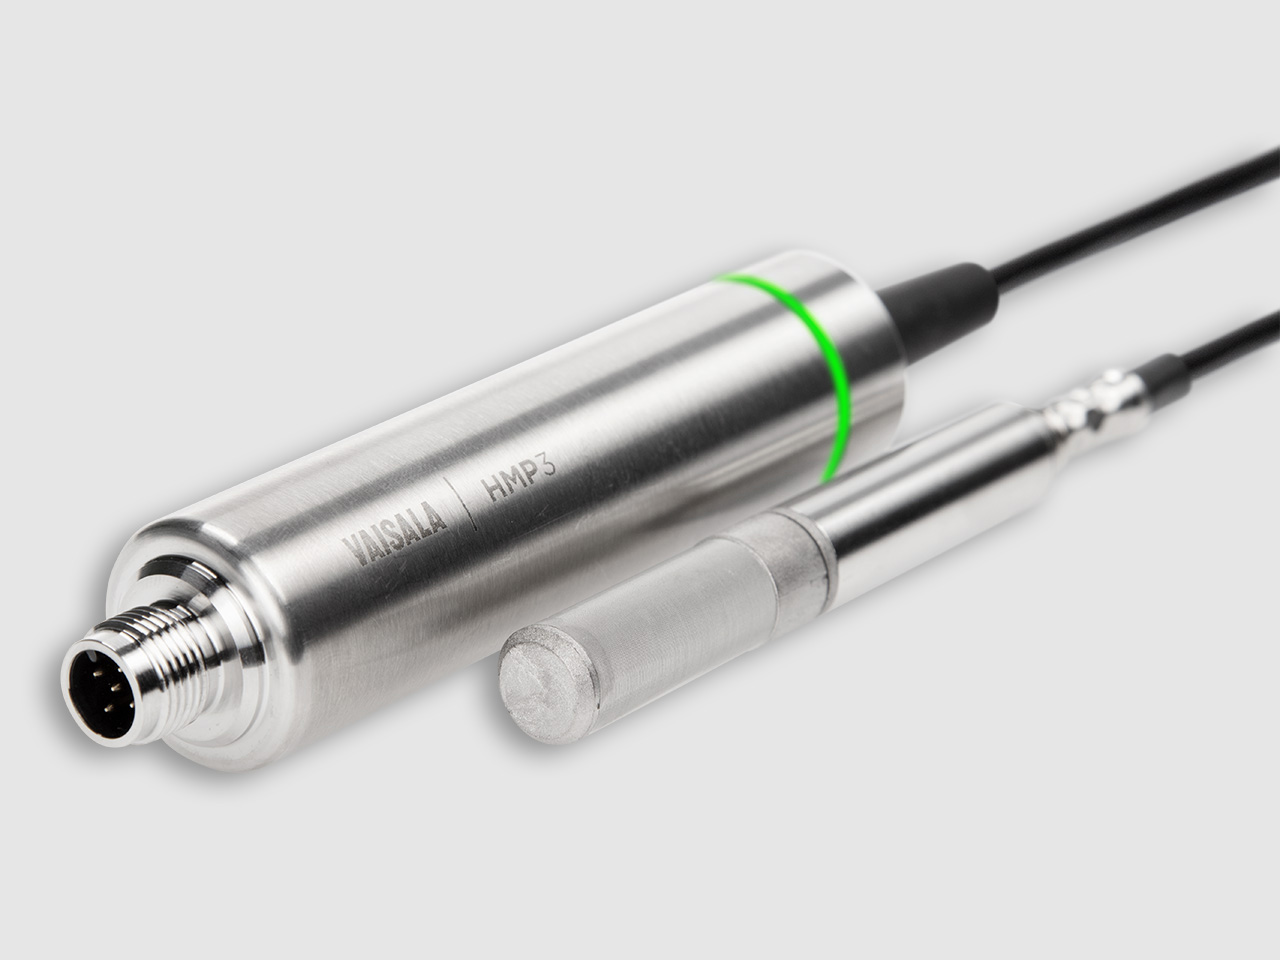 Vaisala HUMICAP® Humidity and Temperature Probe HMP3 is a general-purpose probe designed for processes with moderate humidity and temperature levels.